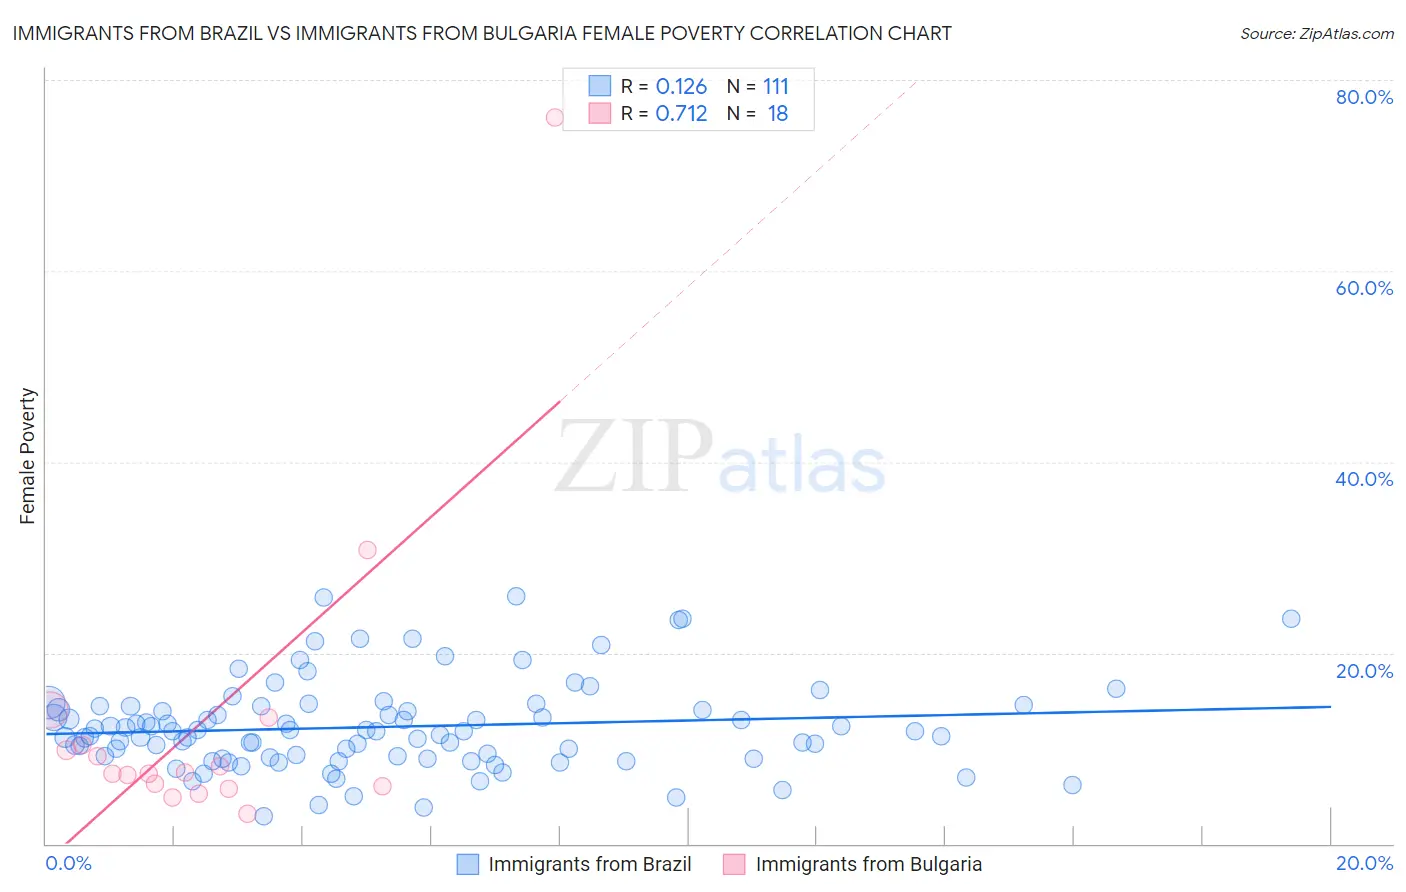 Immigrants from Brazil vs Immigrants from Bulgaria Female Poverty